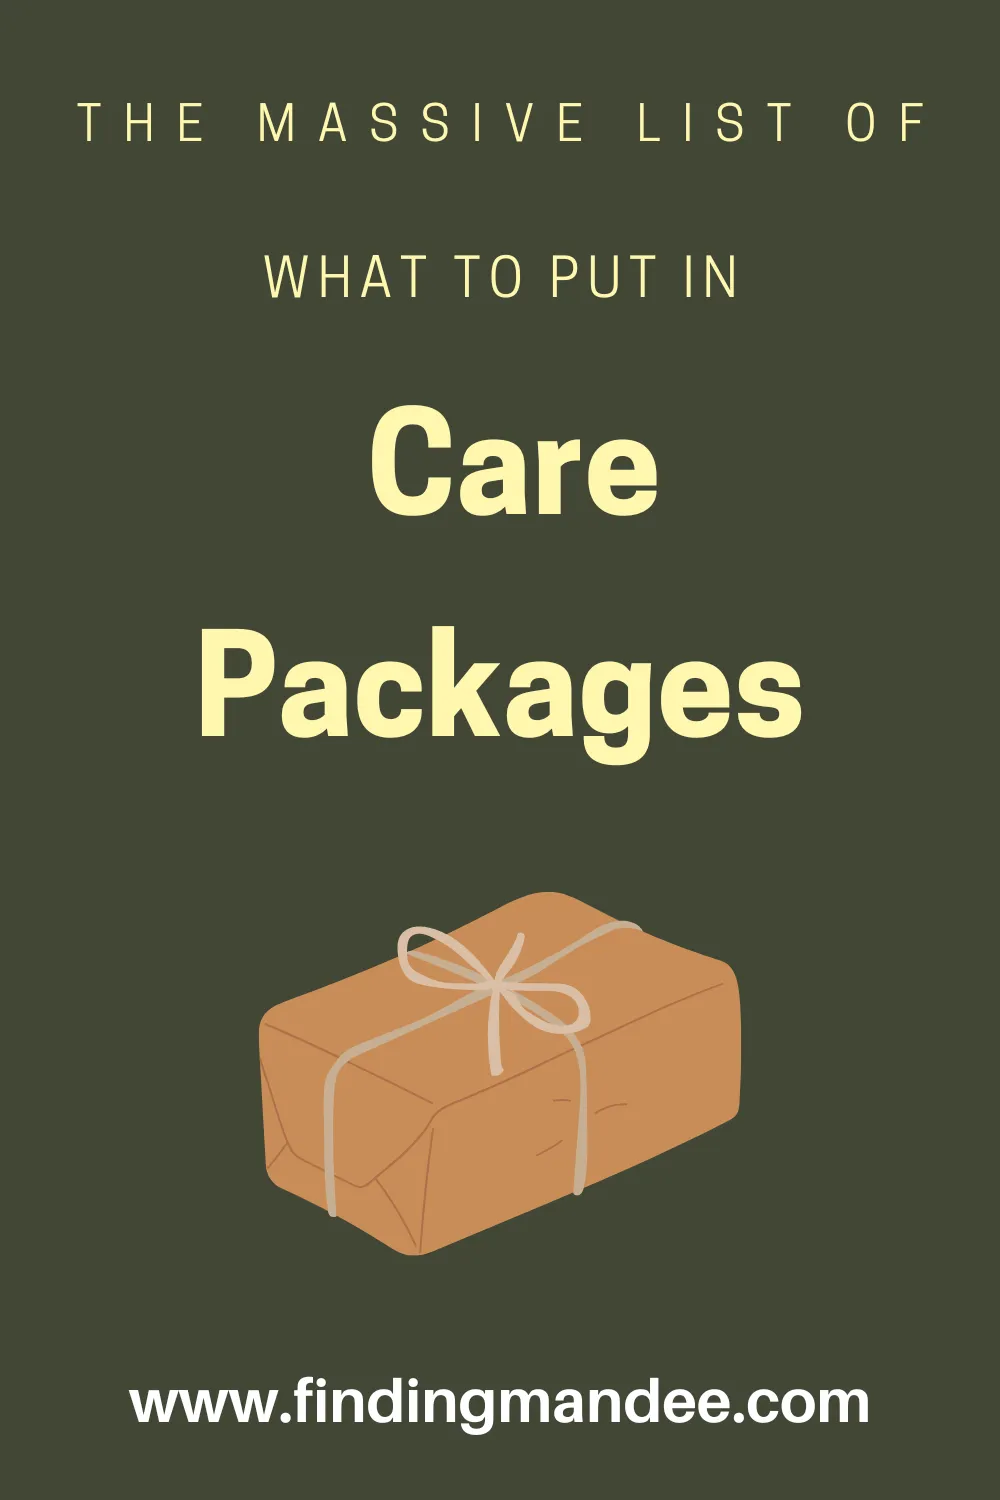 A Massive List of What to Put in Care Packages | Finding Mandee